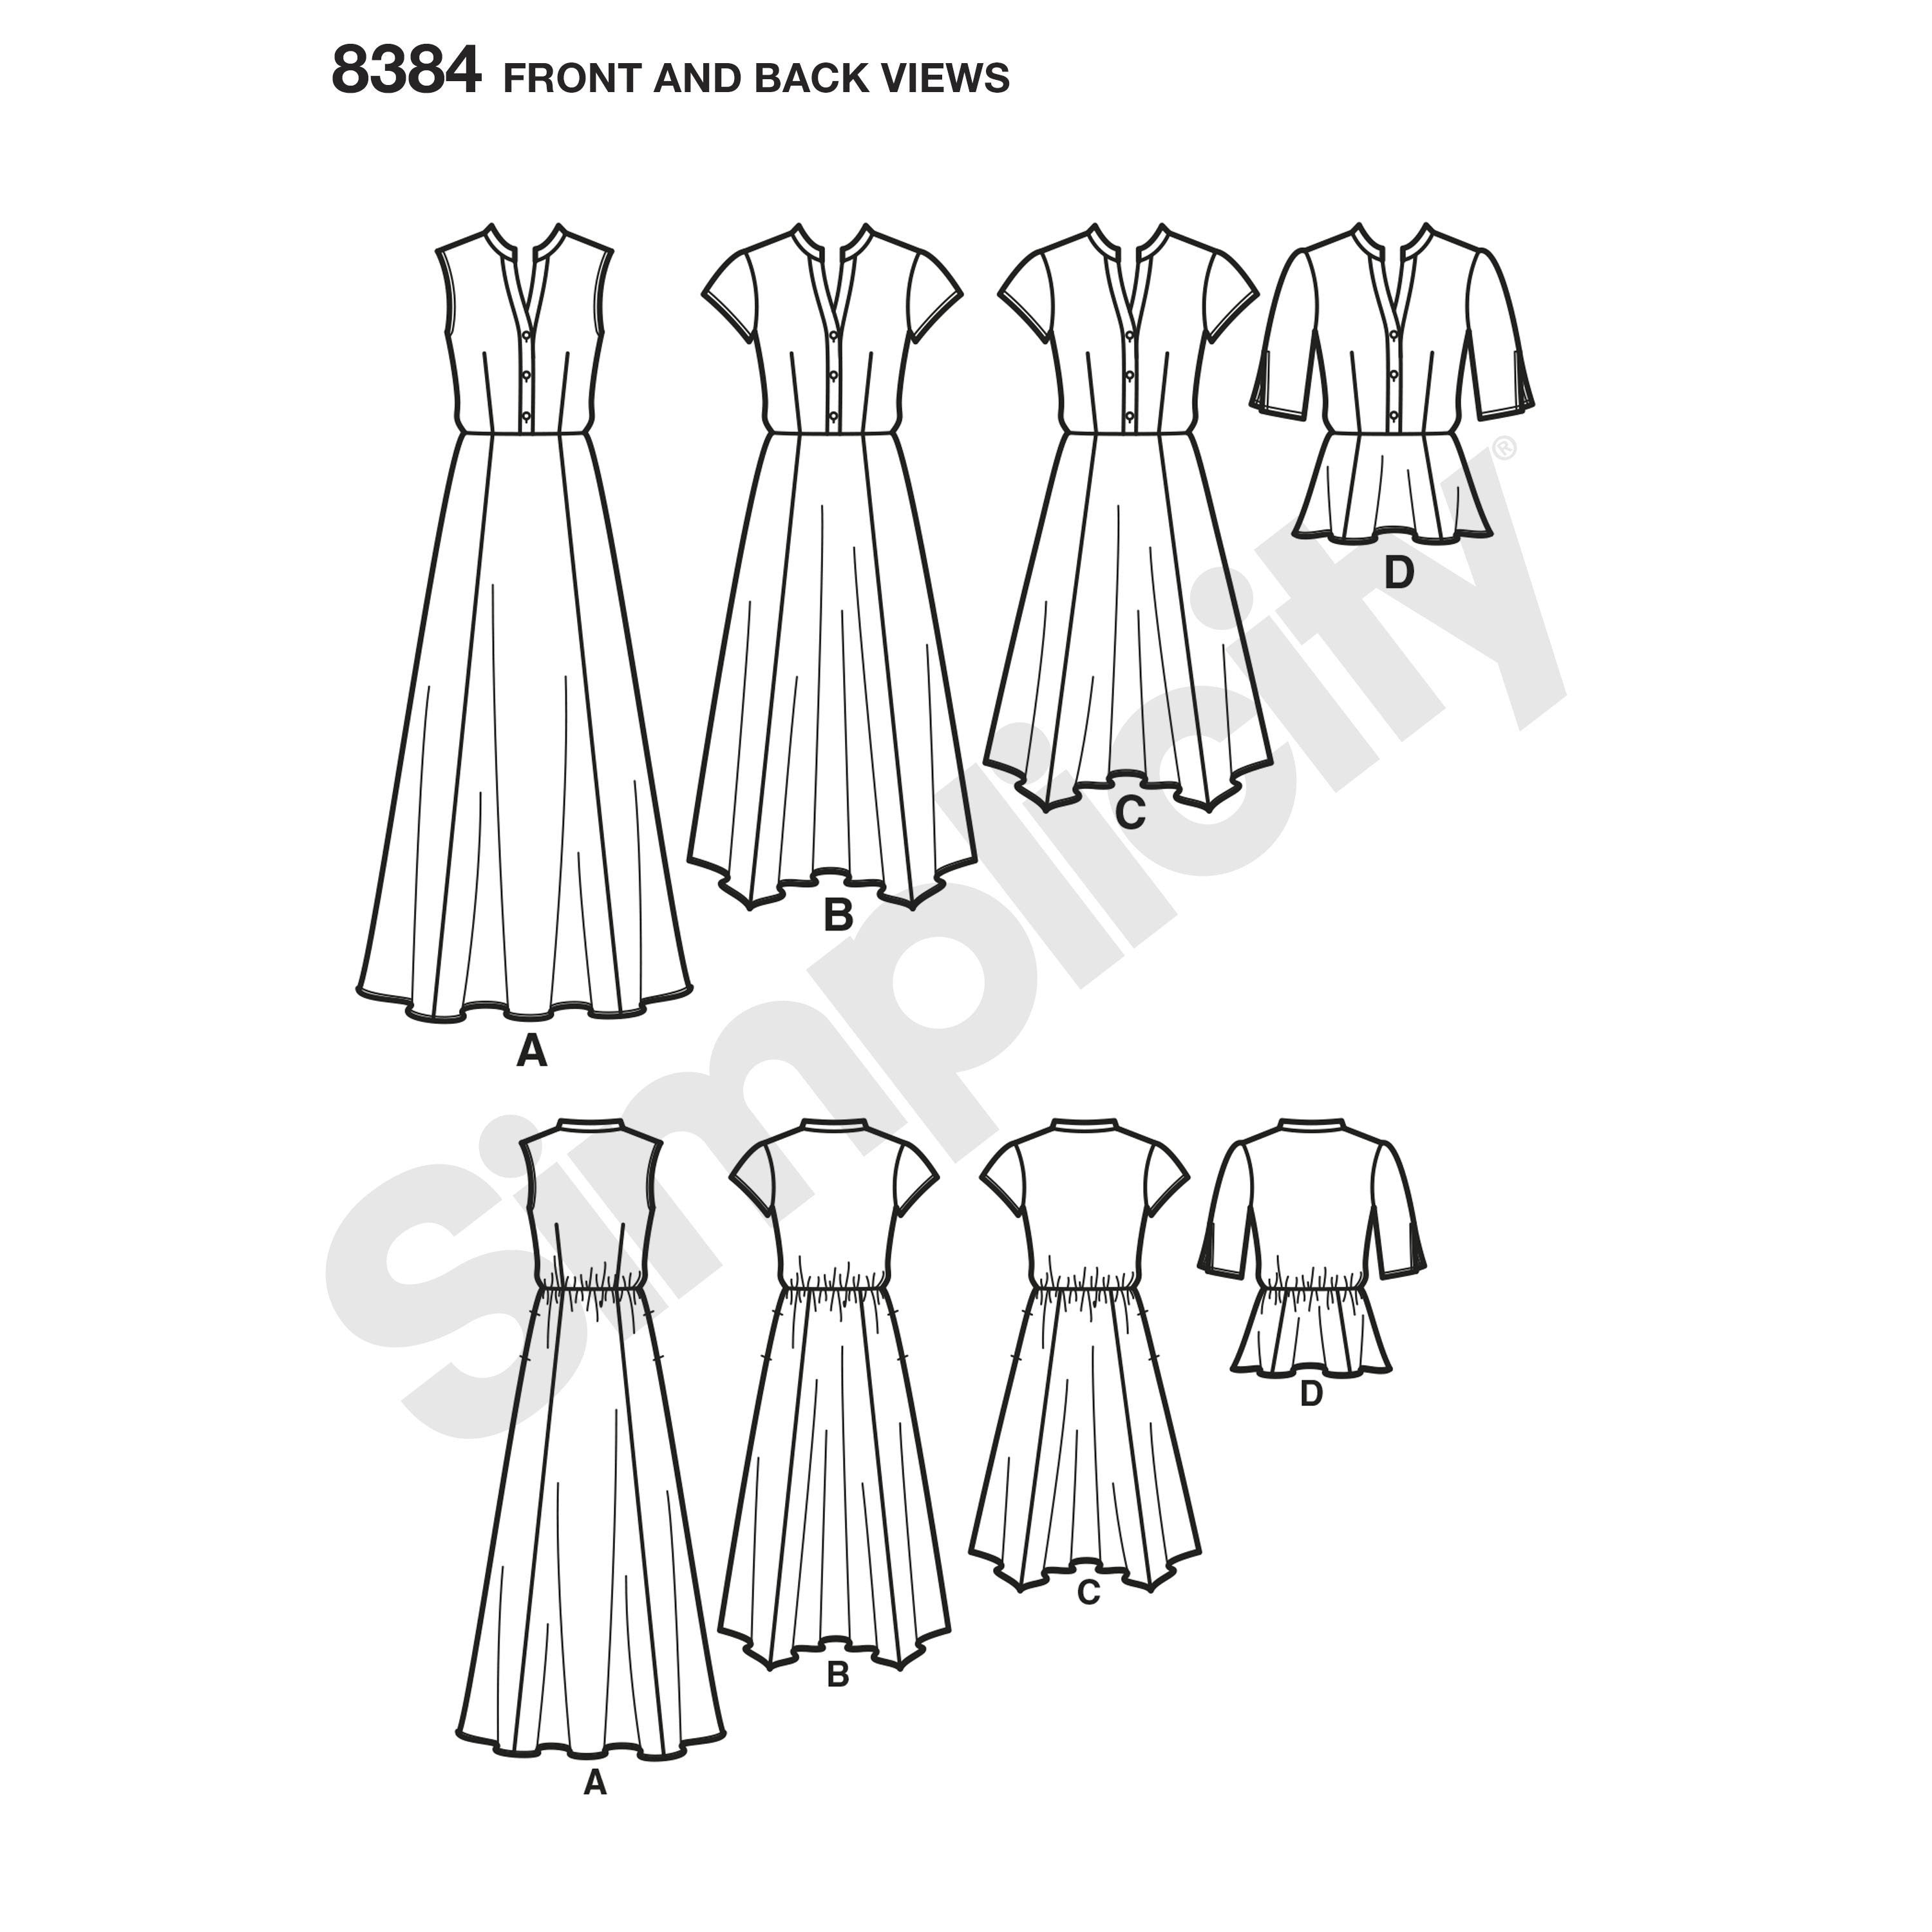 Simplicity Pattern 8384 Womenâ€™s Dress from Jaycotts Sewing Supplies